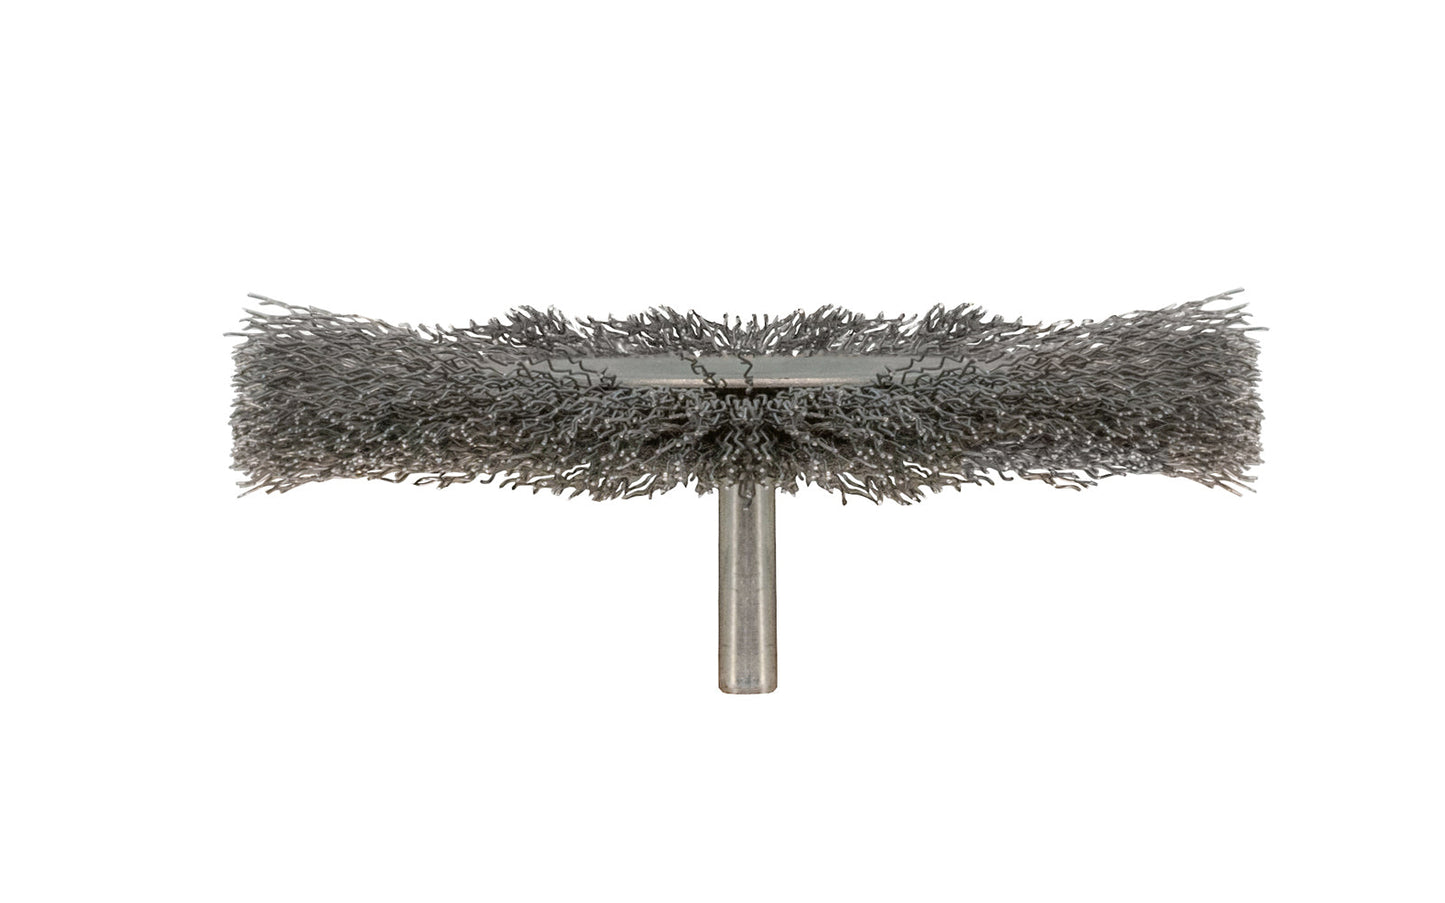 Alfa Tools 4" Coarse Wire Wheel - 1/4" Shank. 0.012" Wire Diameter. 4500 RPM max. All-steel construction. Applications include deburring, blending, removal of rust, scale, dirt, & finish preparation prior to painting or plating. Made by Alfa Tools. Made in Spain.